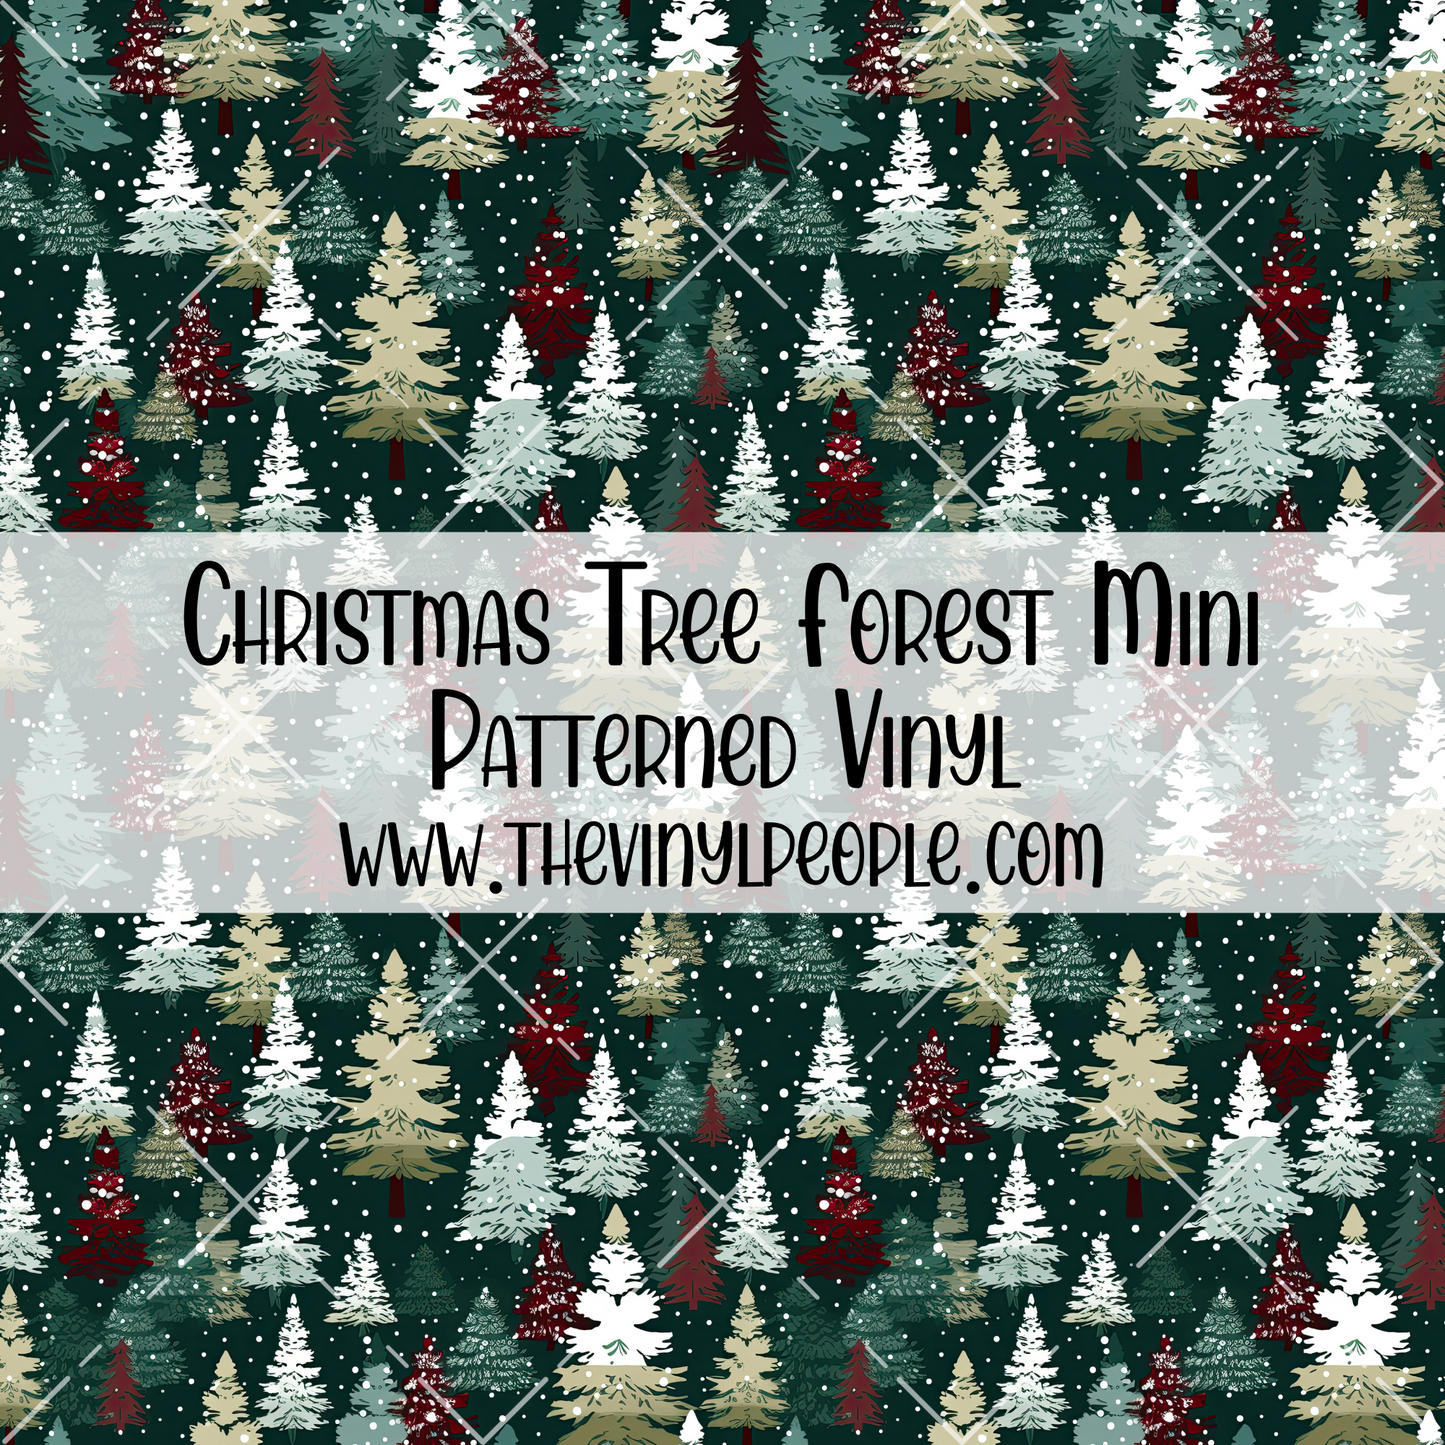 Christmas Tree Forest Patterned Vinyl